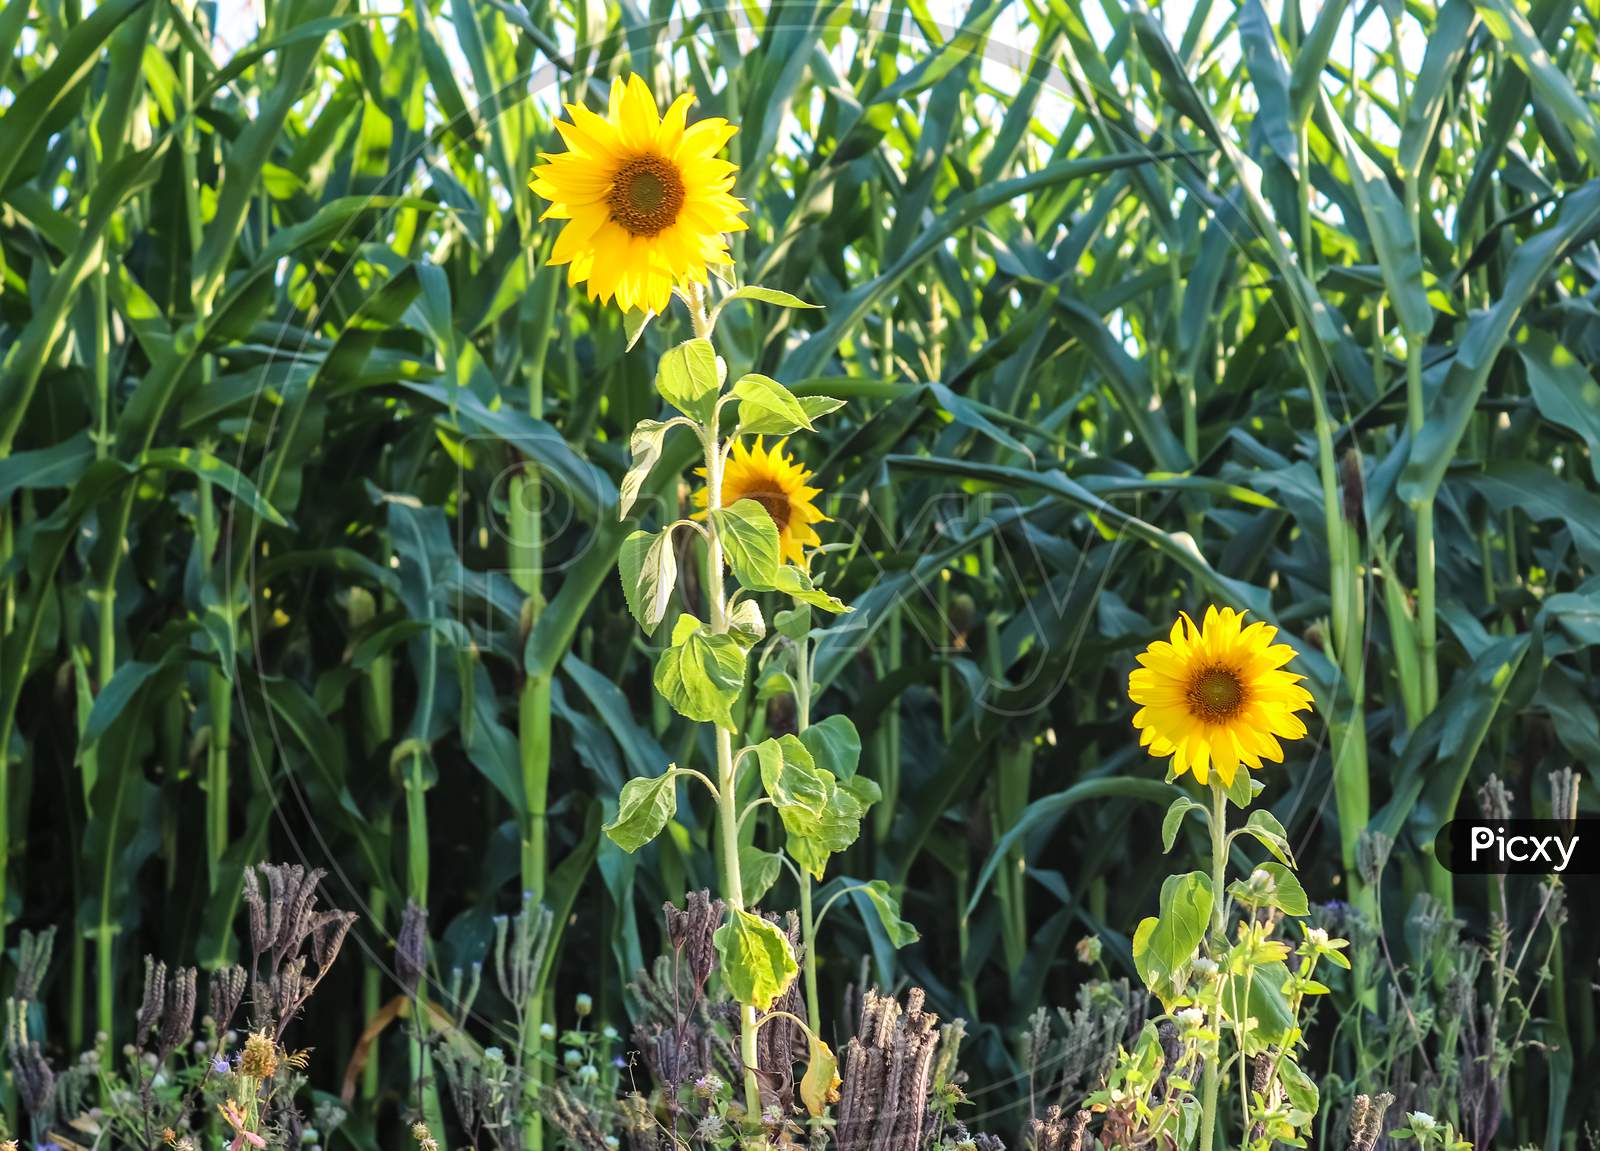 Sunflowers In Front Of A Crop Field By The Roadside Against The Sun